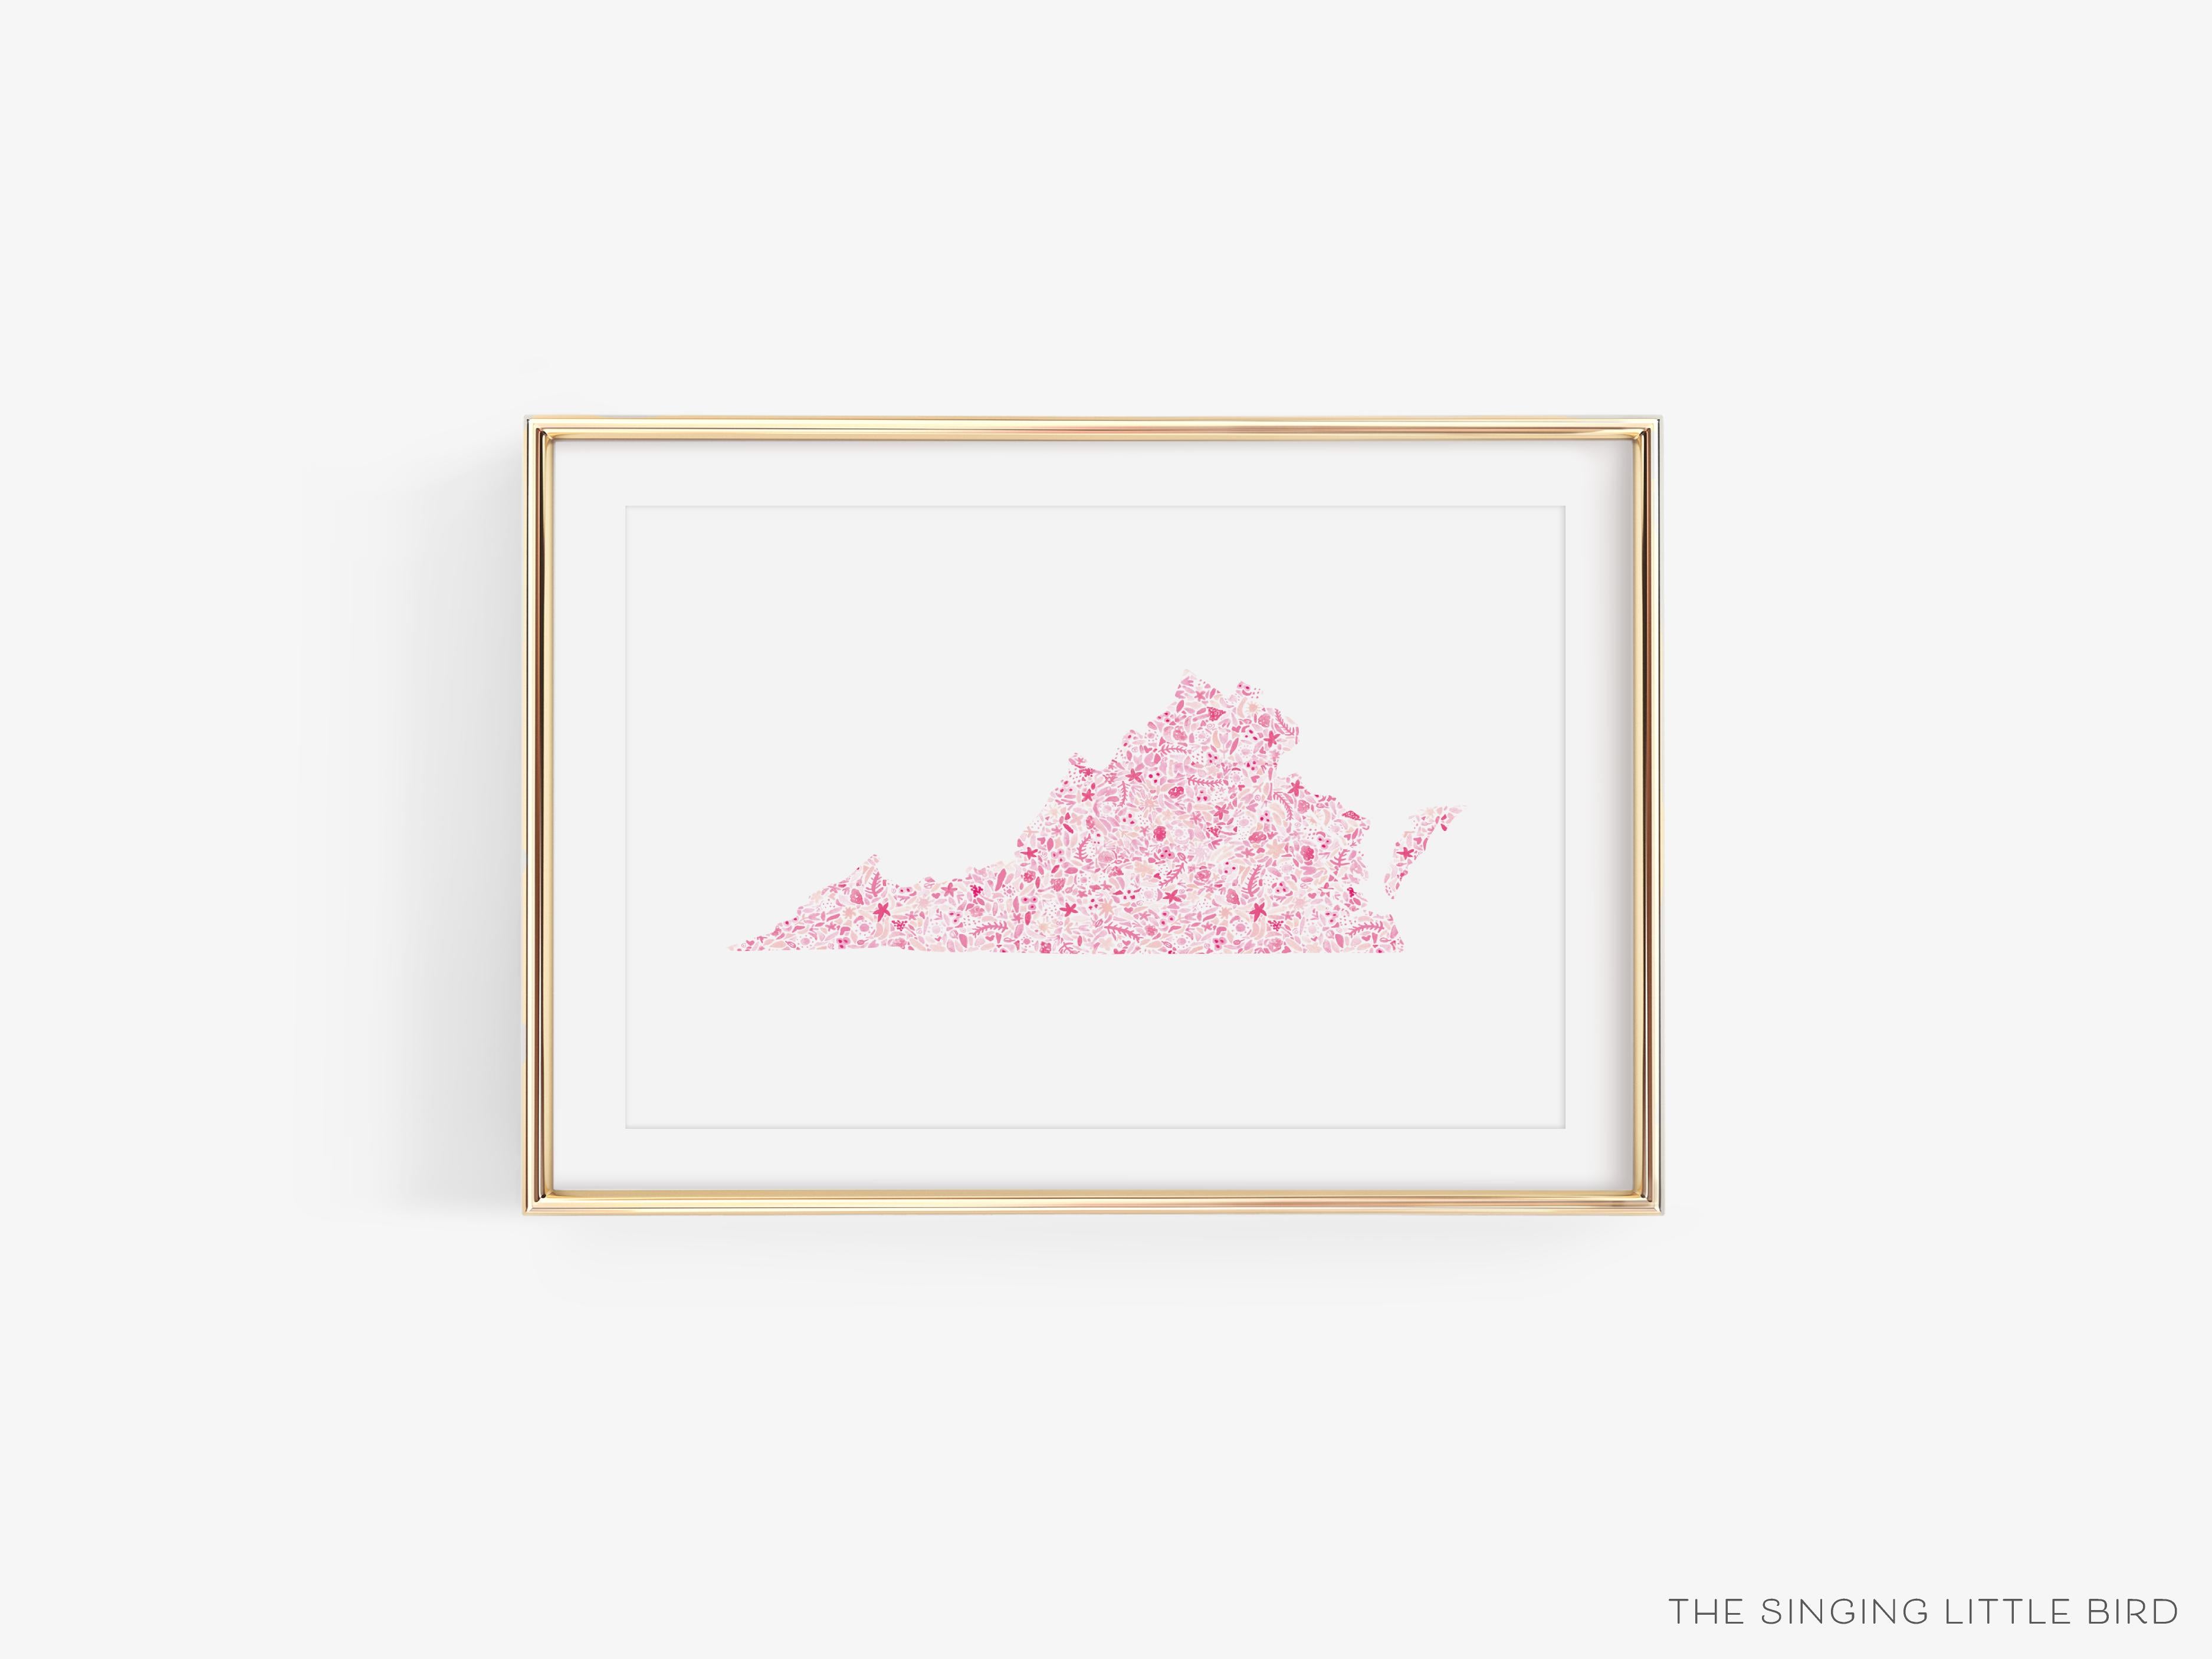 State of Virginia Art Print-This watercolor art print features our hand-painted floral pattern in the shape of Virginia, printed in the USA on 120lb high quality art paper. This makes a great gift or wall decor for the Virginian lover in your life.-The Singing Little Bird